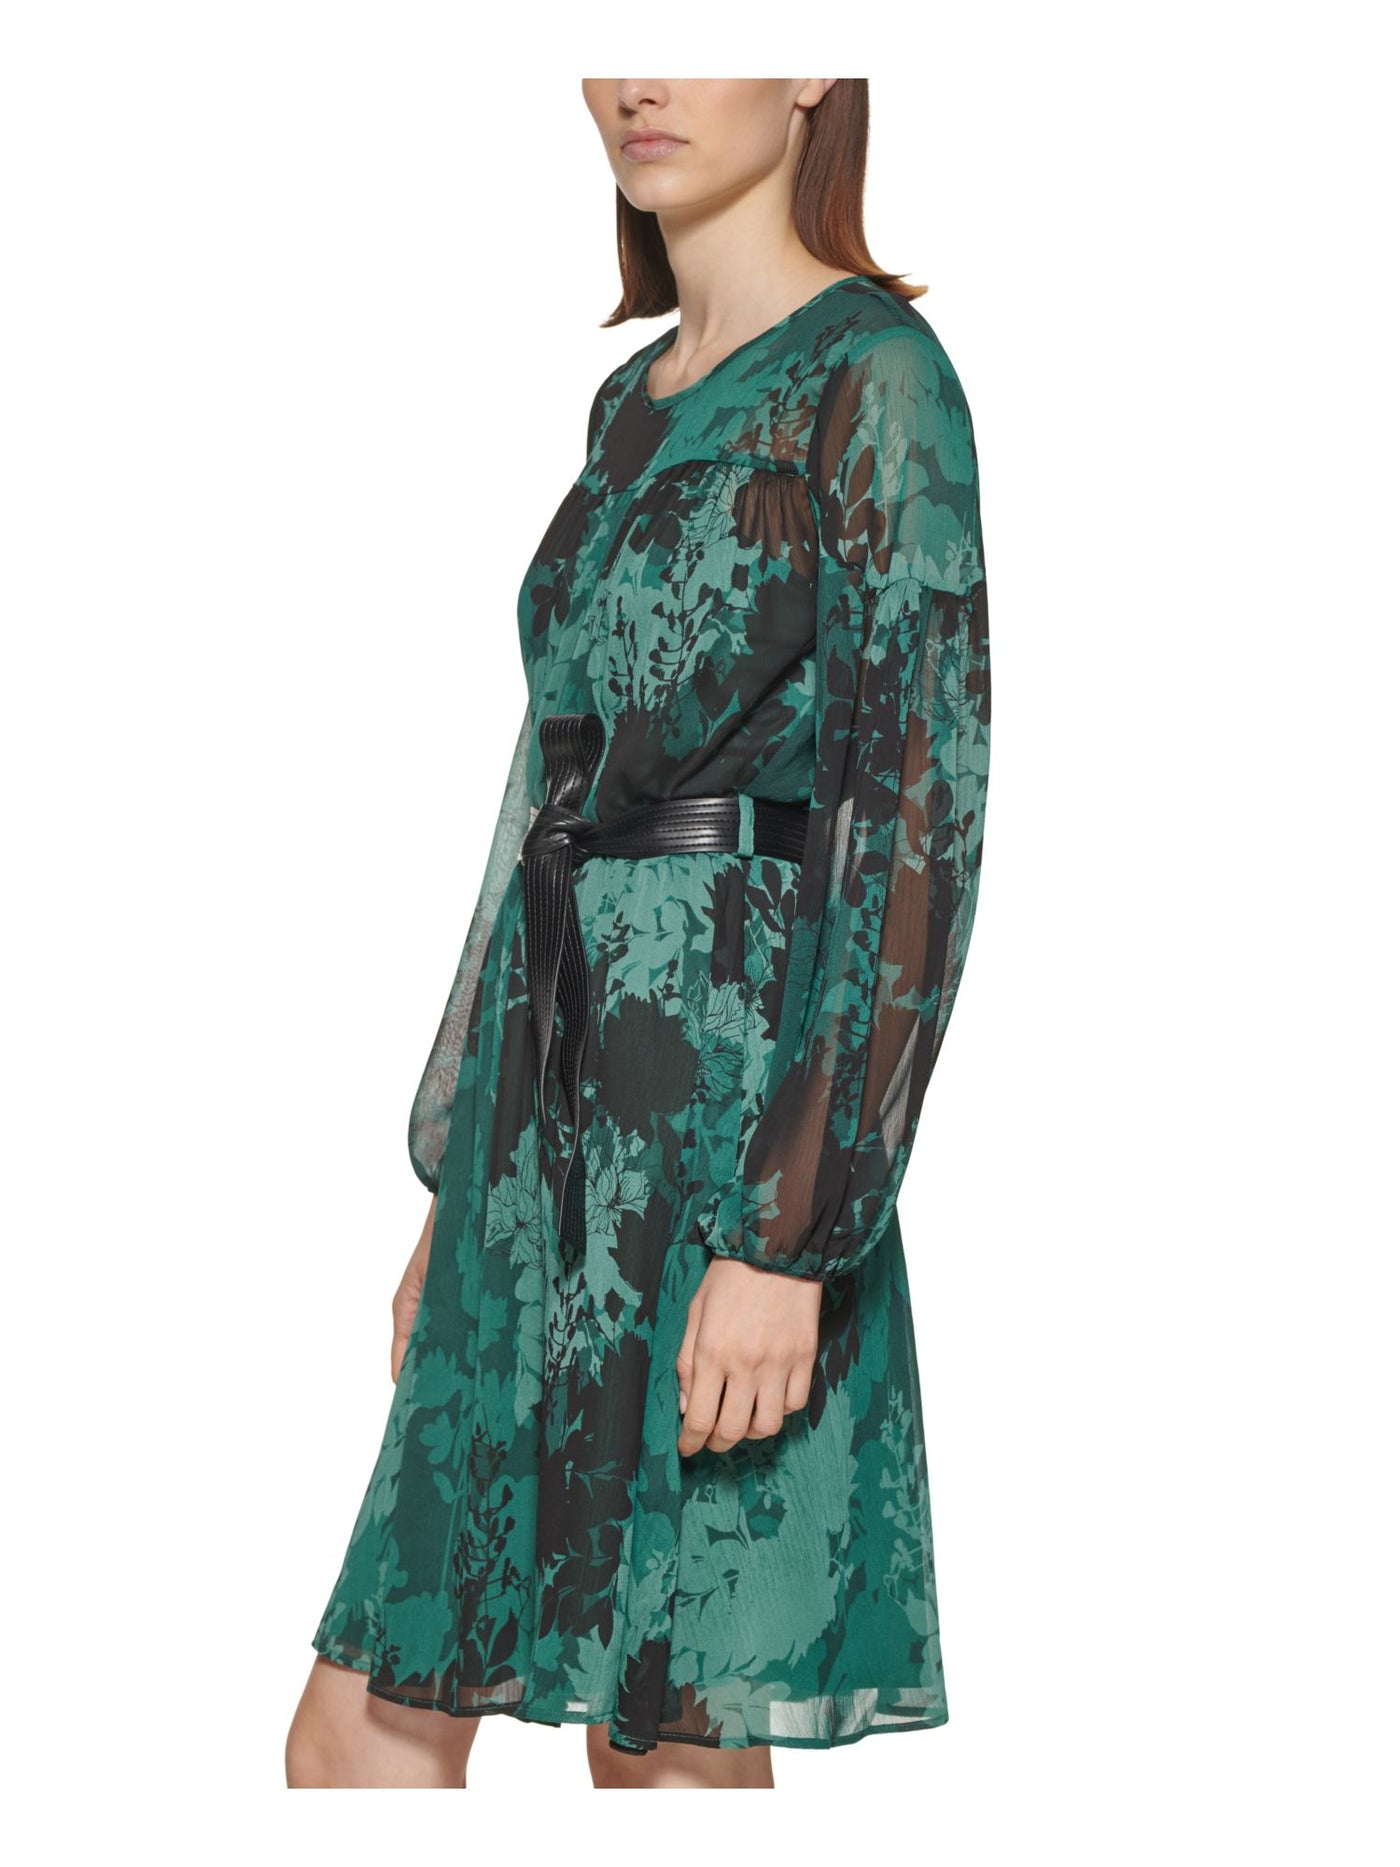 CALVIN KLEIN Womens Green Belted Lined Floral Long Sleeve Round Neck Above The Knee Cocktail Shift Dress Petites 8P